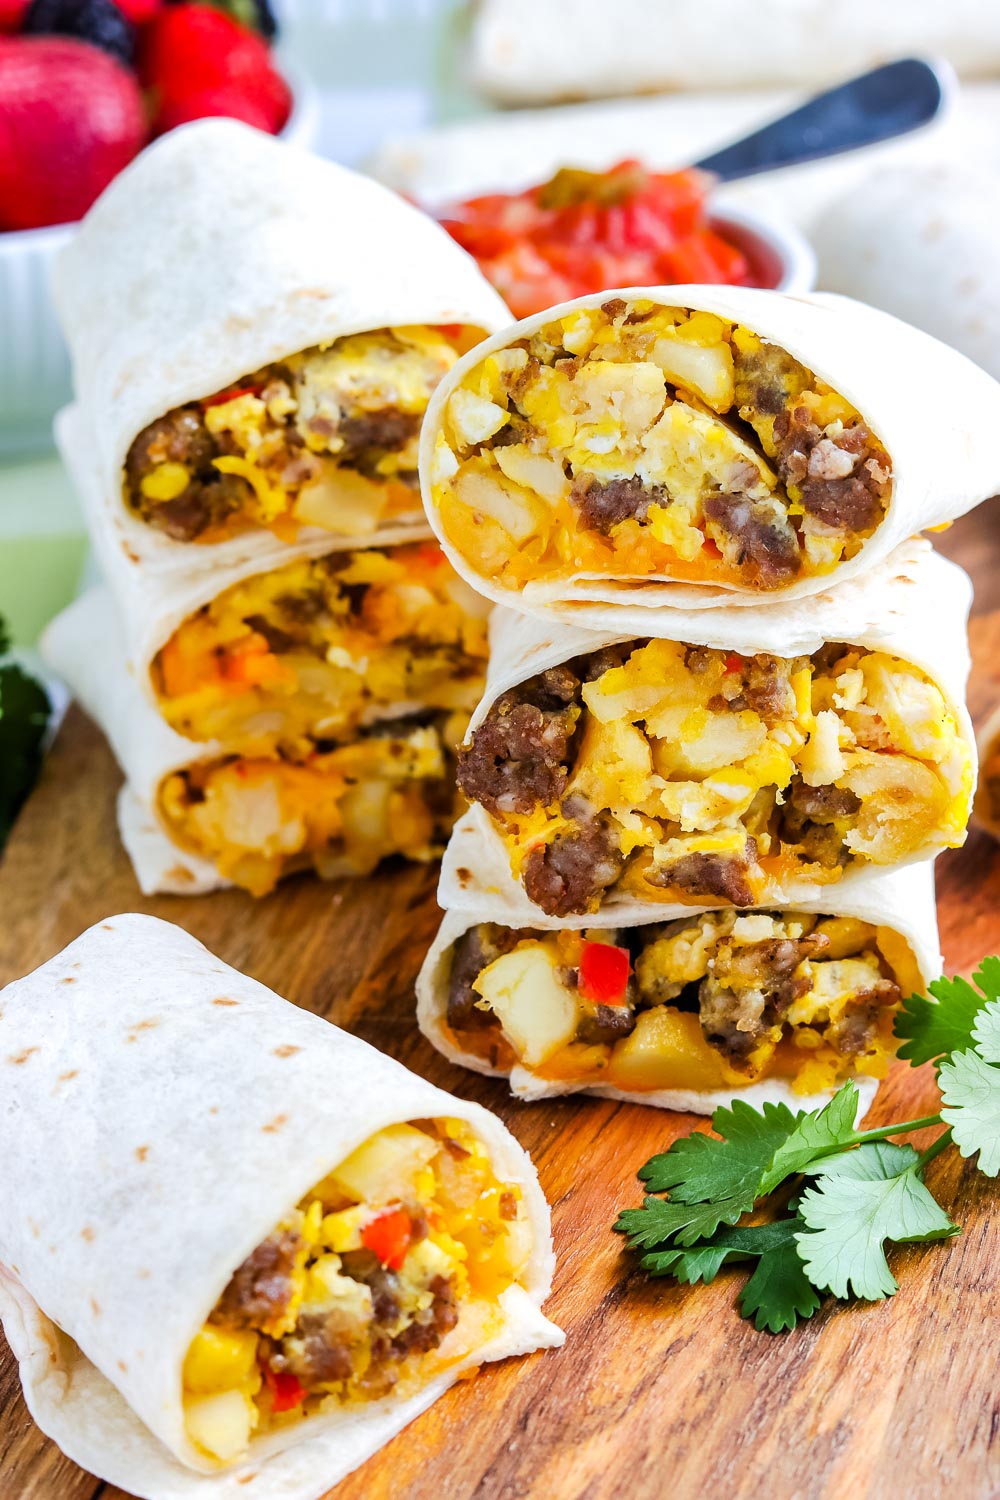 Make Ahead Lunch Wraps - How to Freeze and Thaw Tortilla Wraps